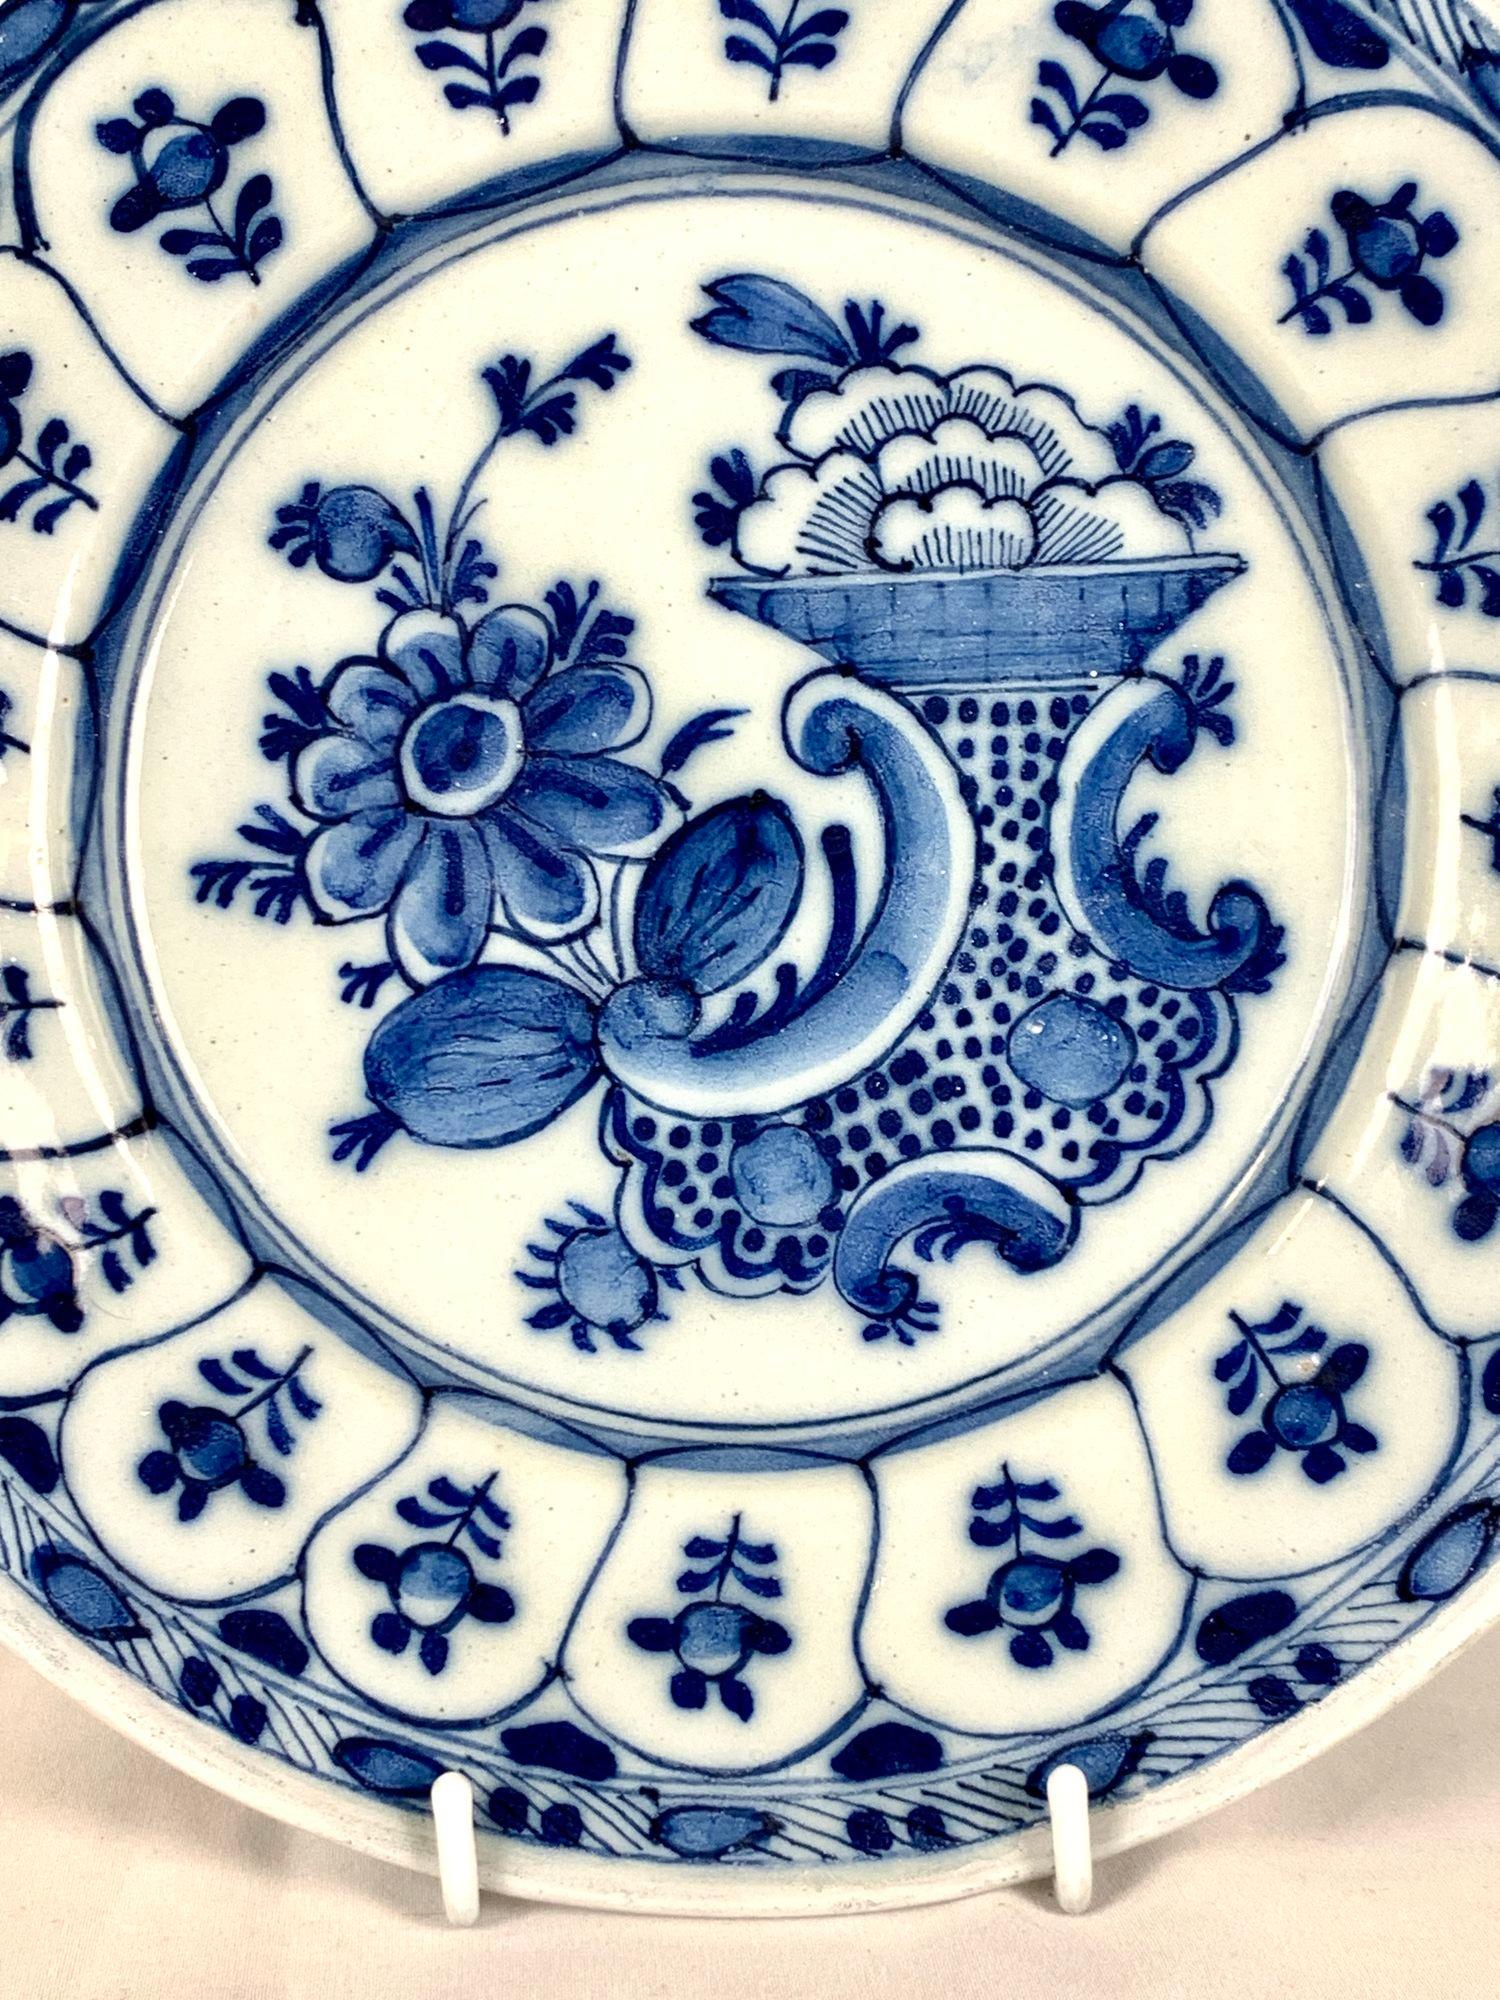 This 18th century blue and white Delft plate was hand painted circa 1780.
The lively scene in the center features flowers, flower buds, and a polka-dotted vase.
The border is decorated with 17 ogival panels, each showing a single flower.
Along the